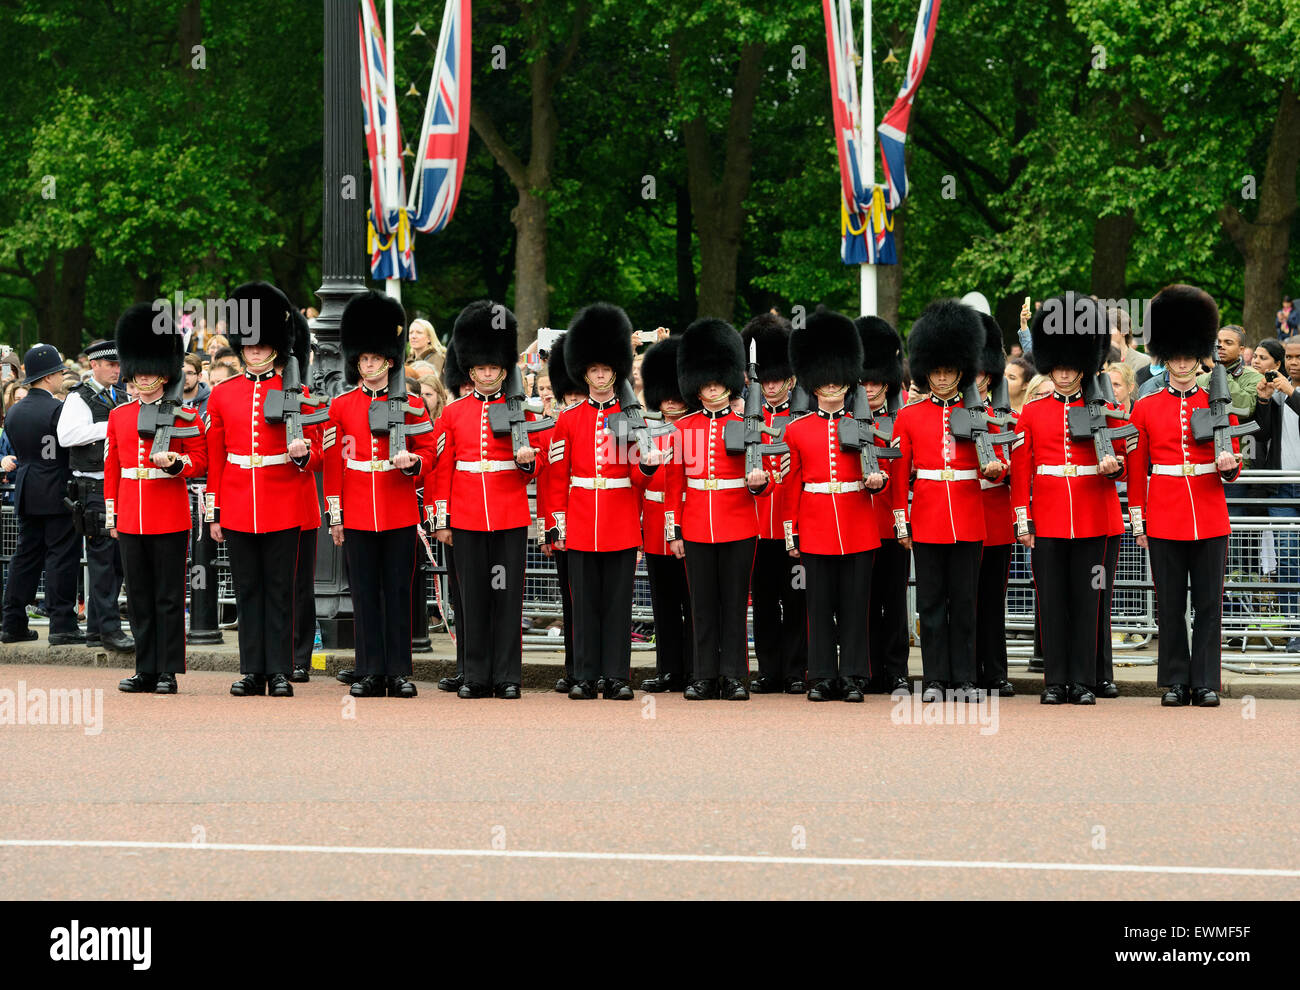 Trooping the Colour, annual military parade to celebrate the birthday of Queen Elizabeth II., Buckingham Palace, London, England Stock Photo